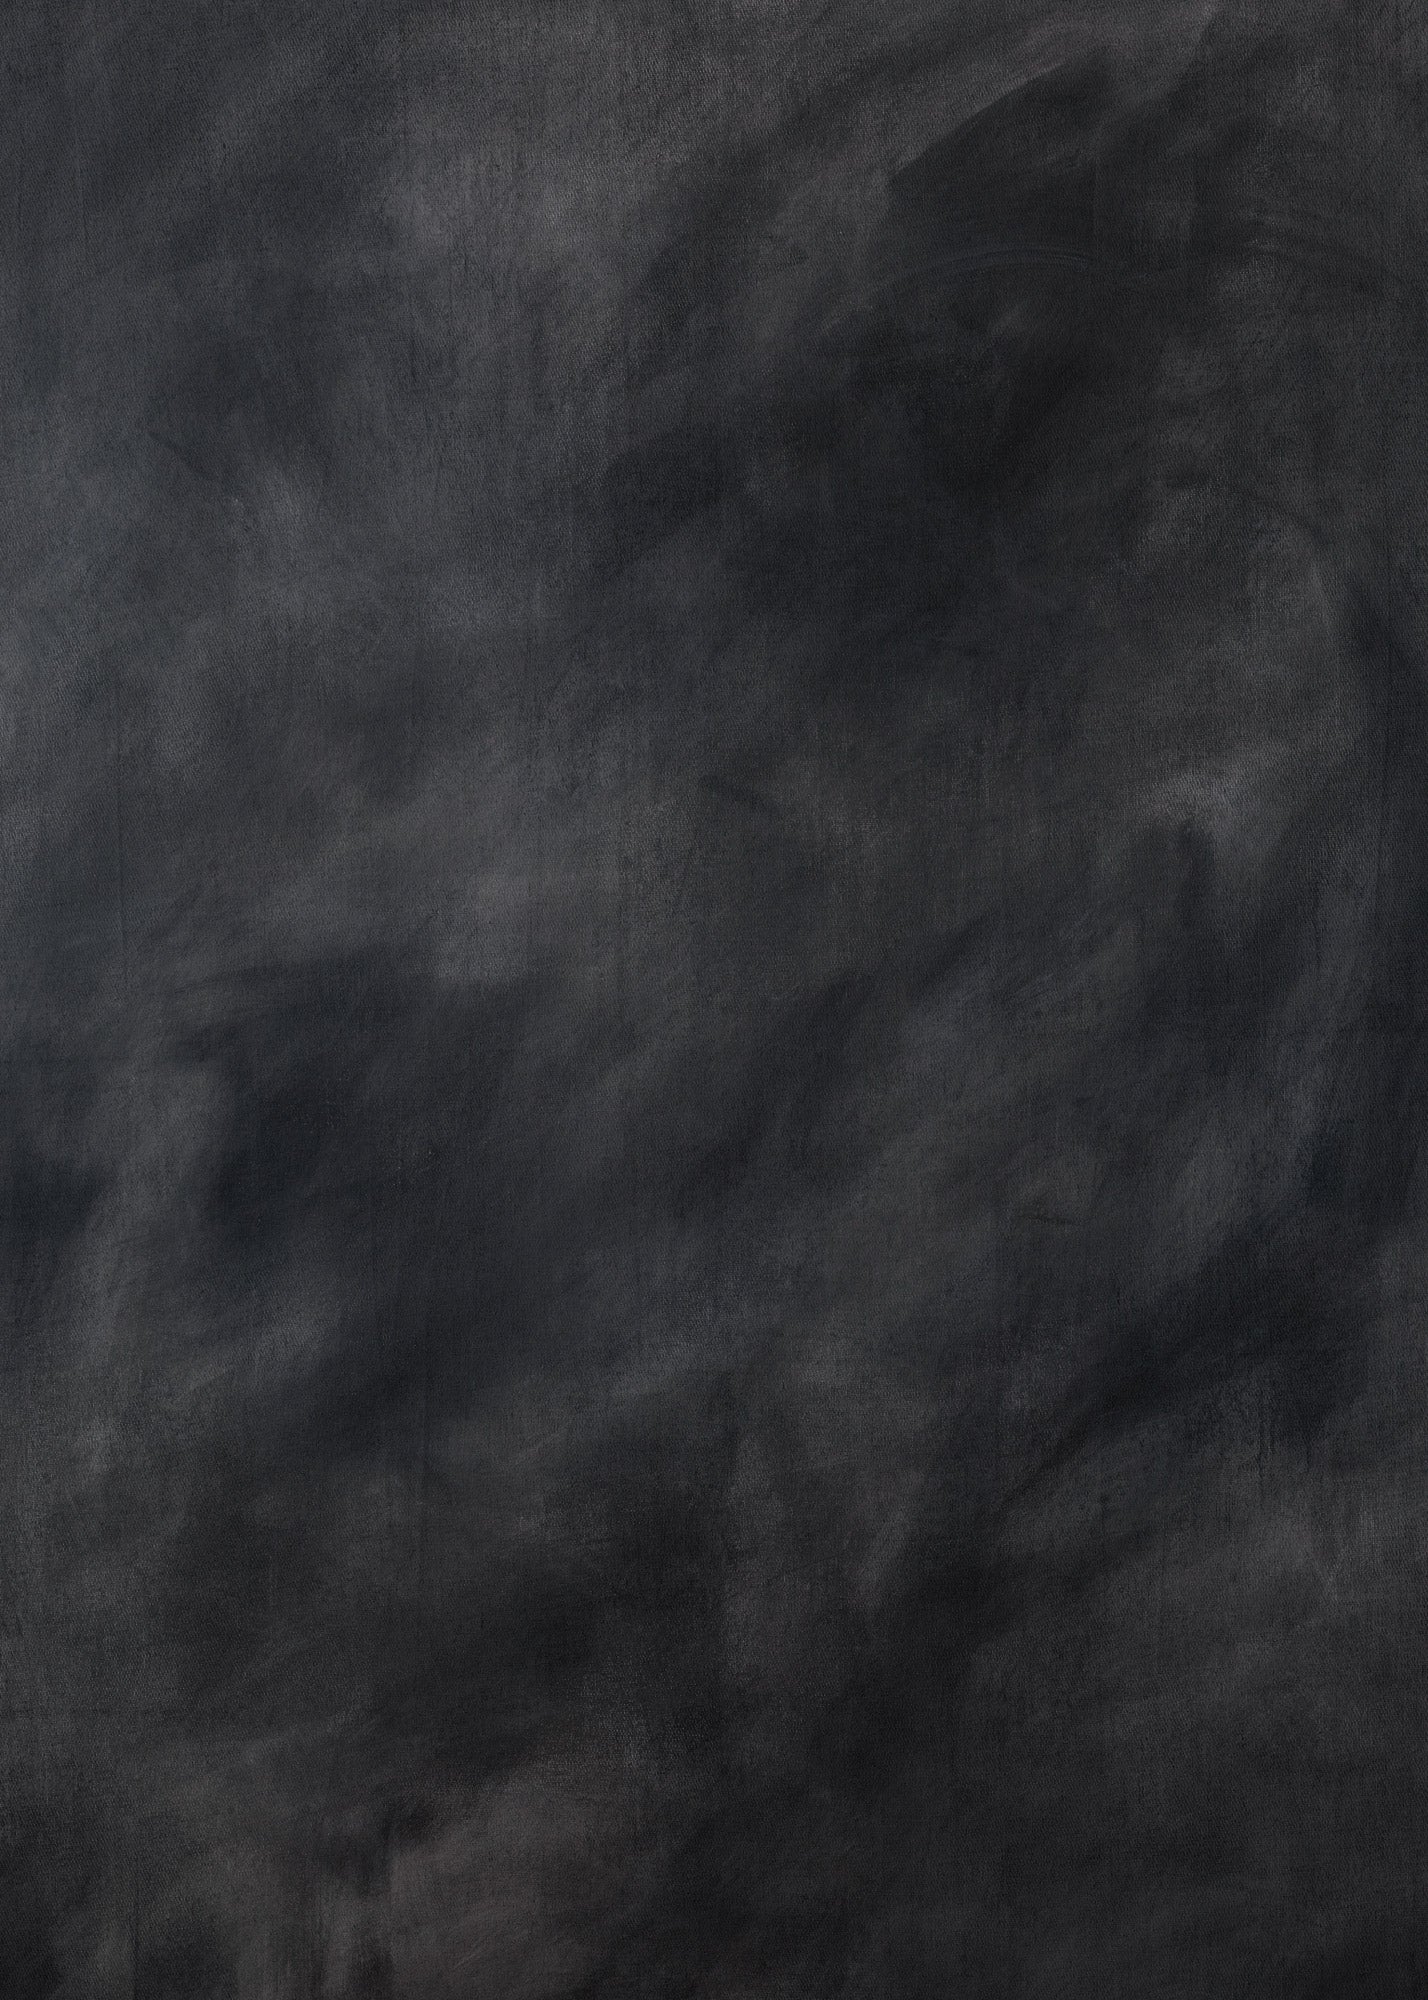 Charcoal Vinyl Photography Backdrop by Club Backdrops